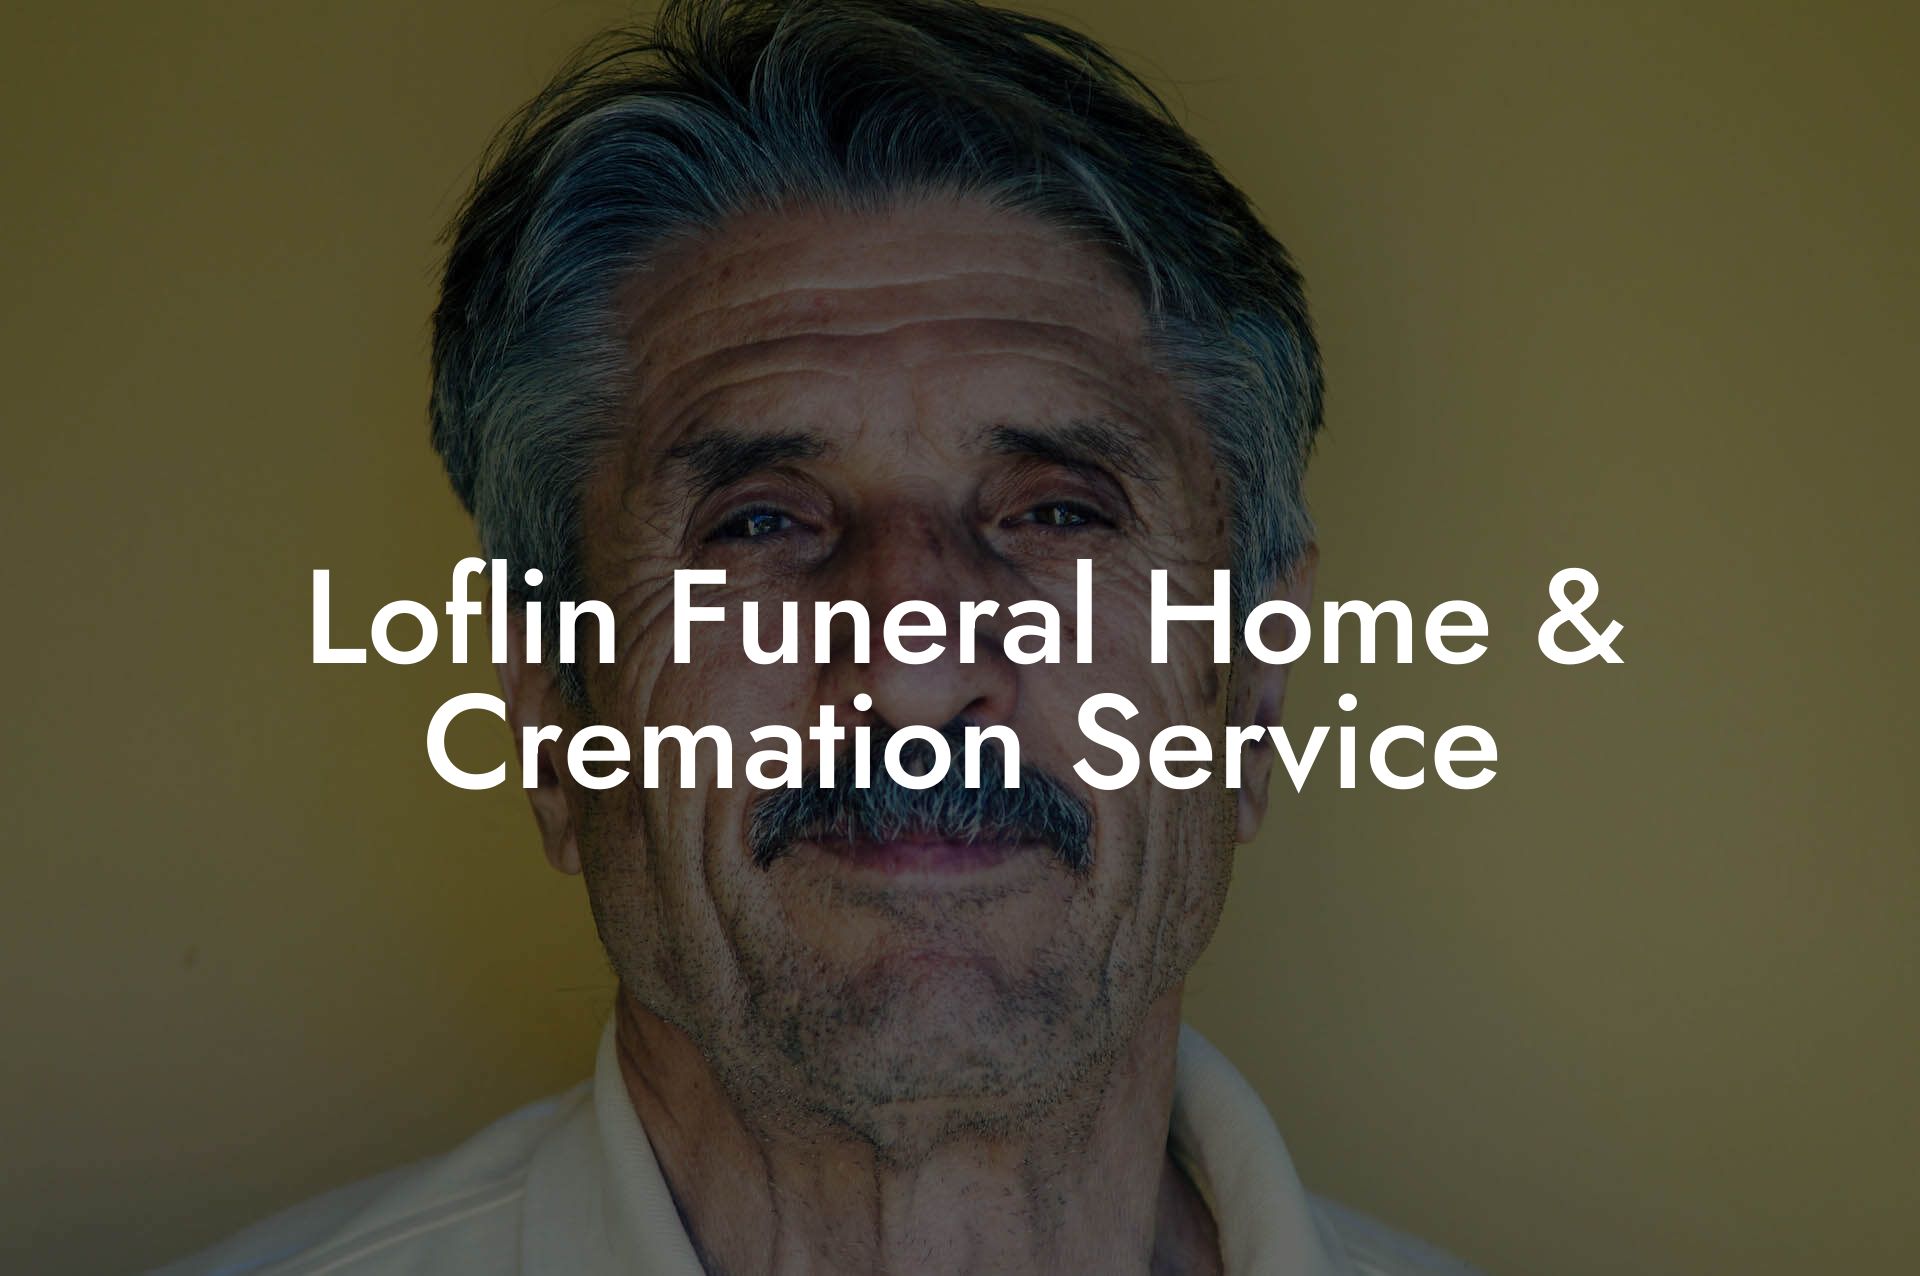 Loflin Funeral Home & Cremation Service